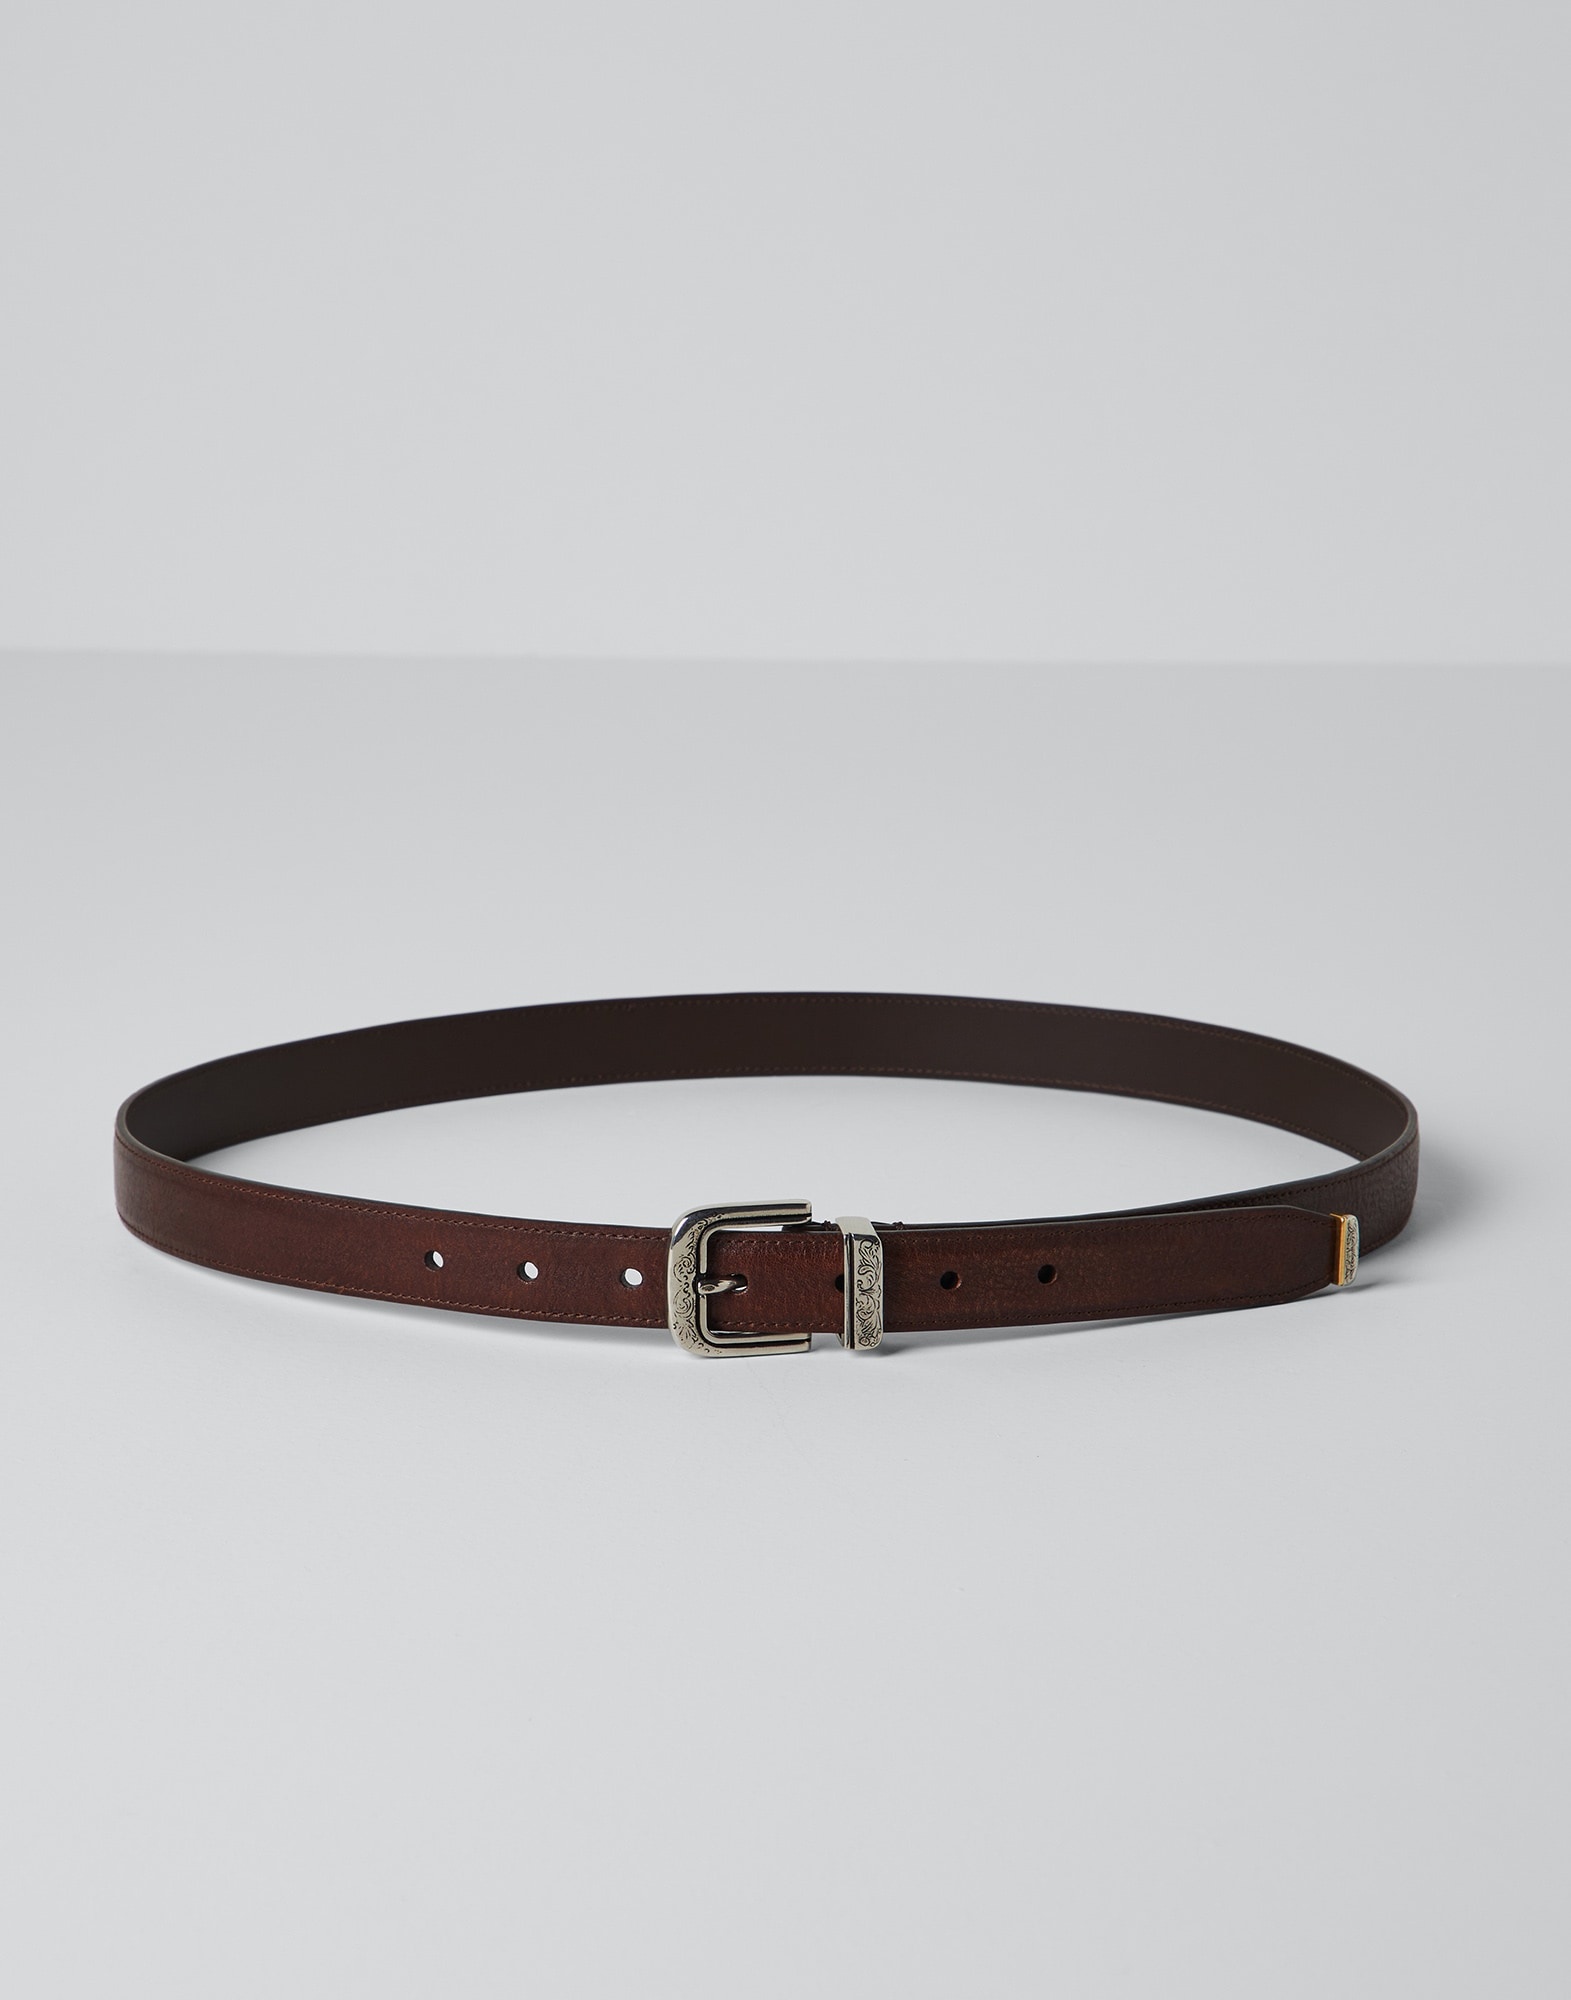 Blotted calfskin belt with detailed buckle and tip - 1